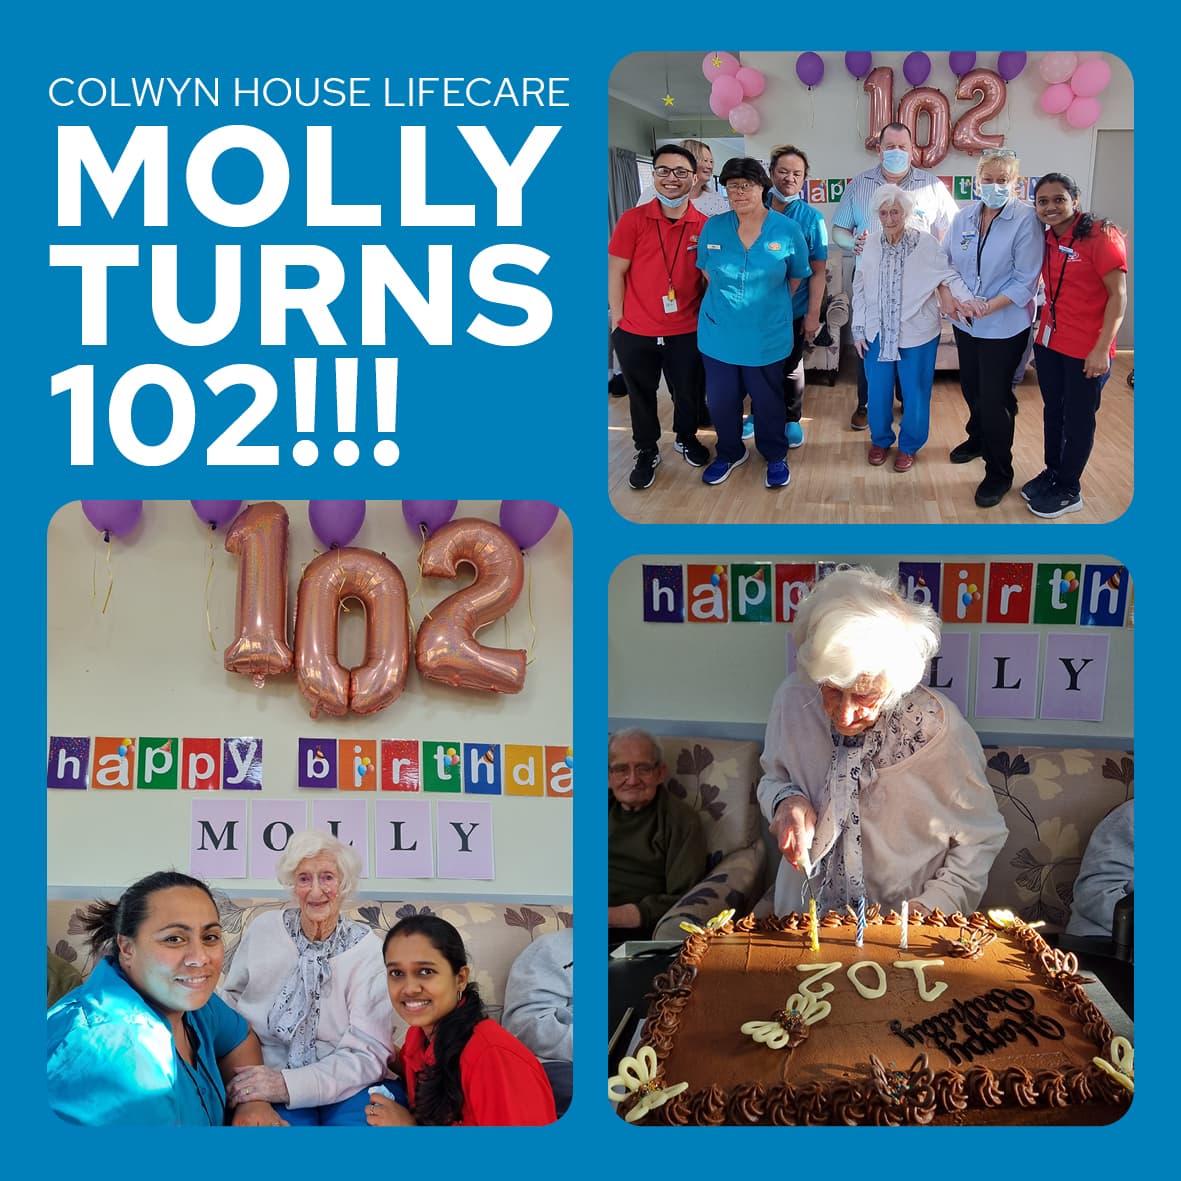 Molly Turns 102.